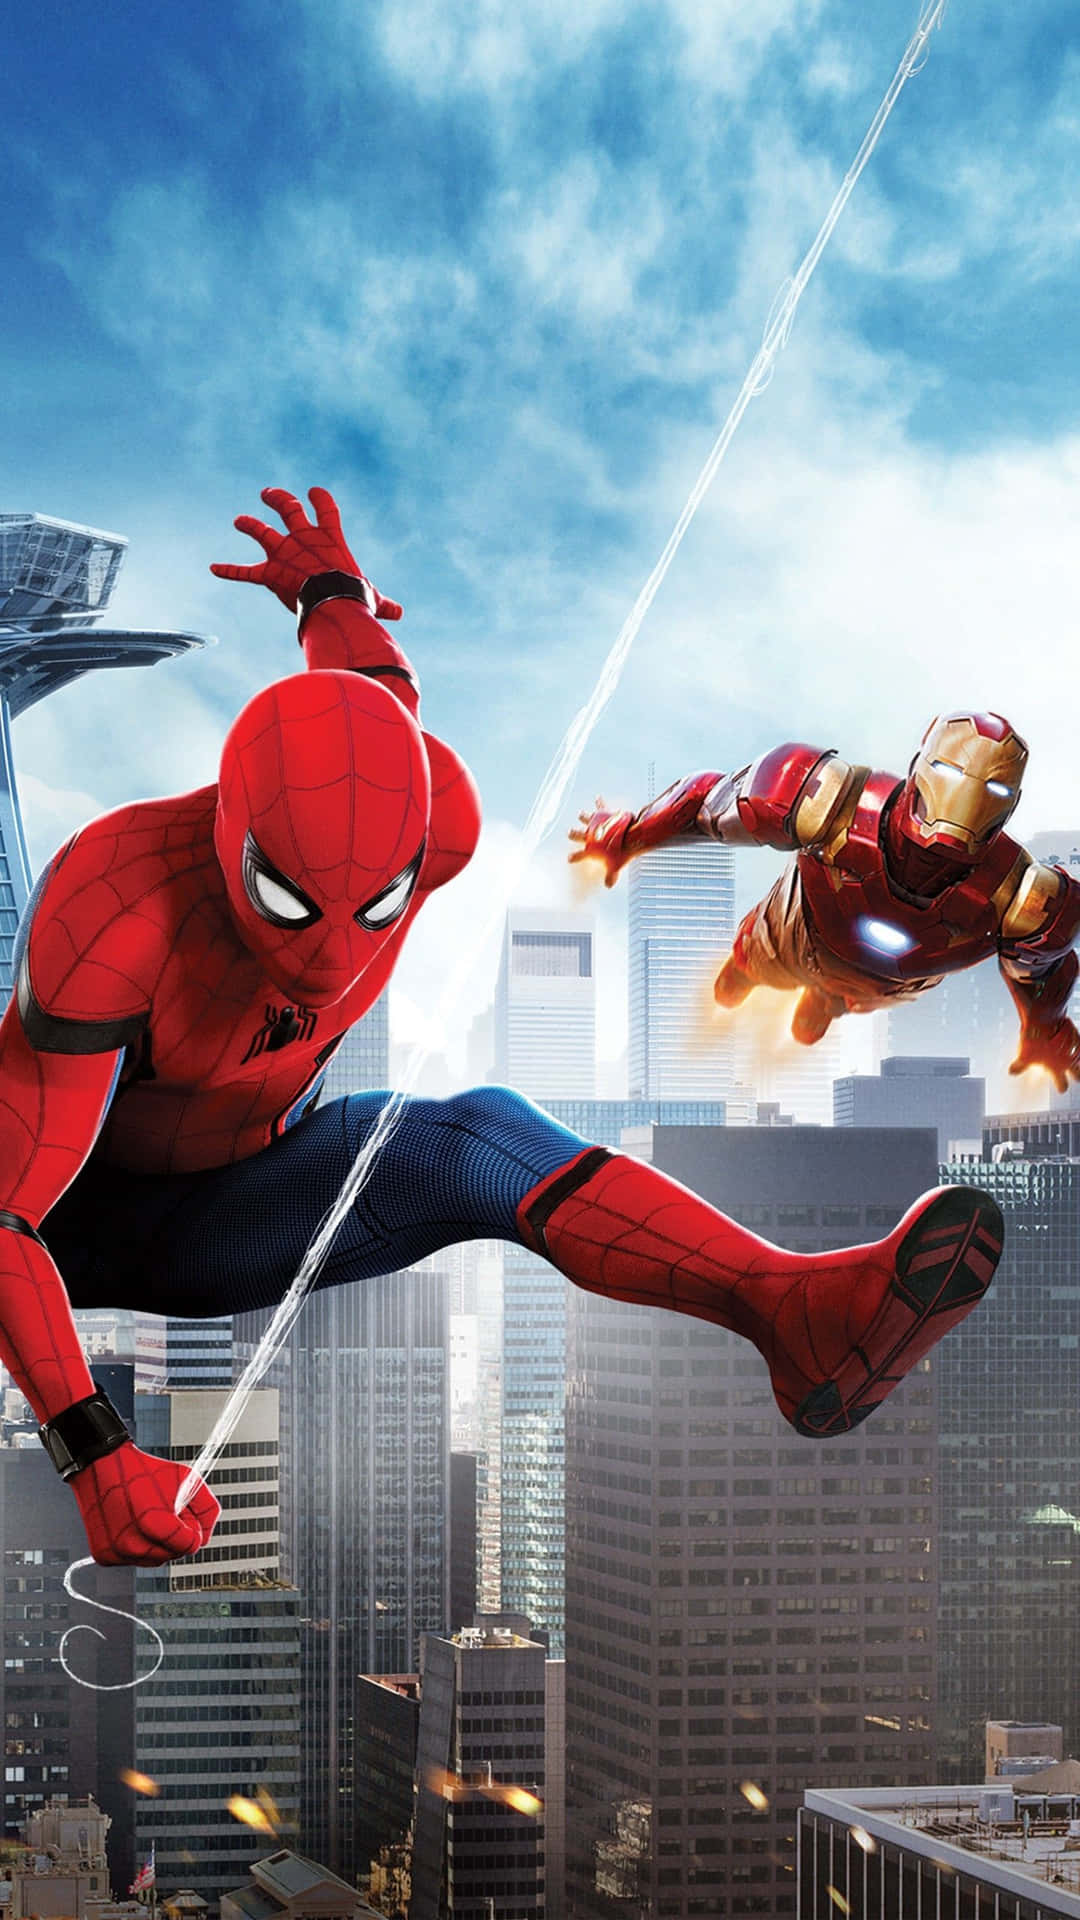 An epic team up: Iron Man and Spider-Man together! Wallpaper